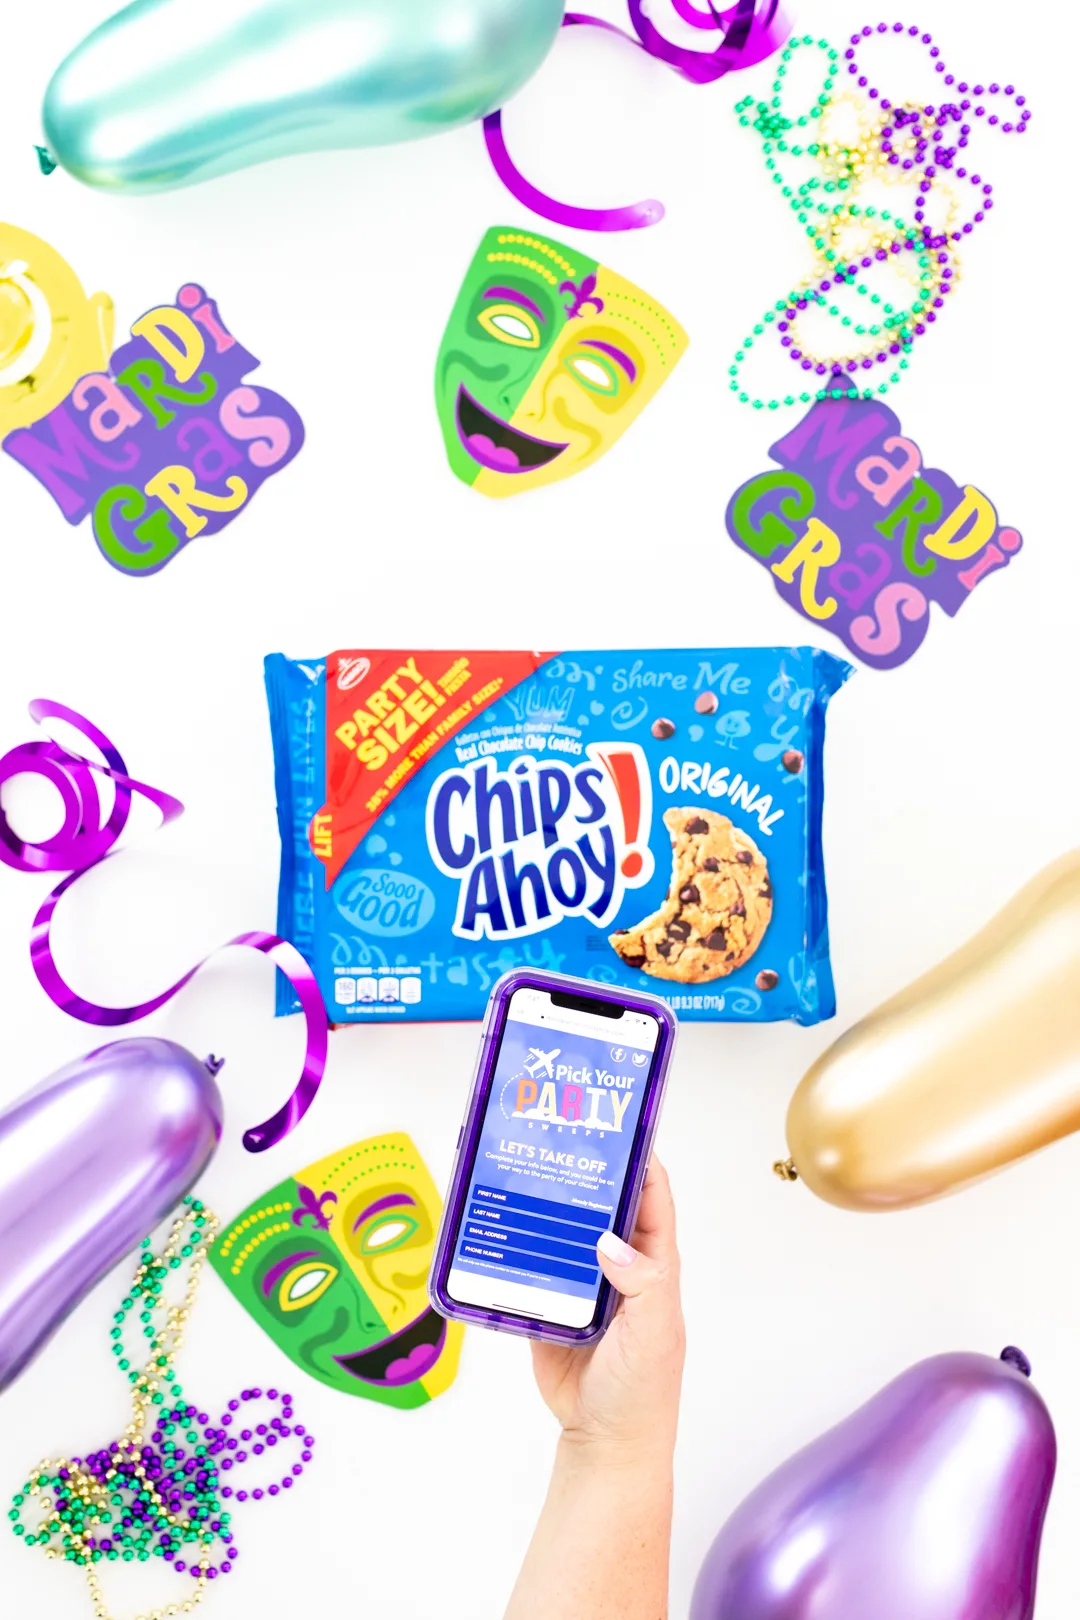 Party sized chips ahoy! packages